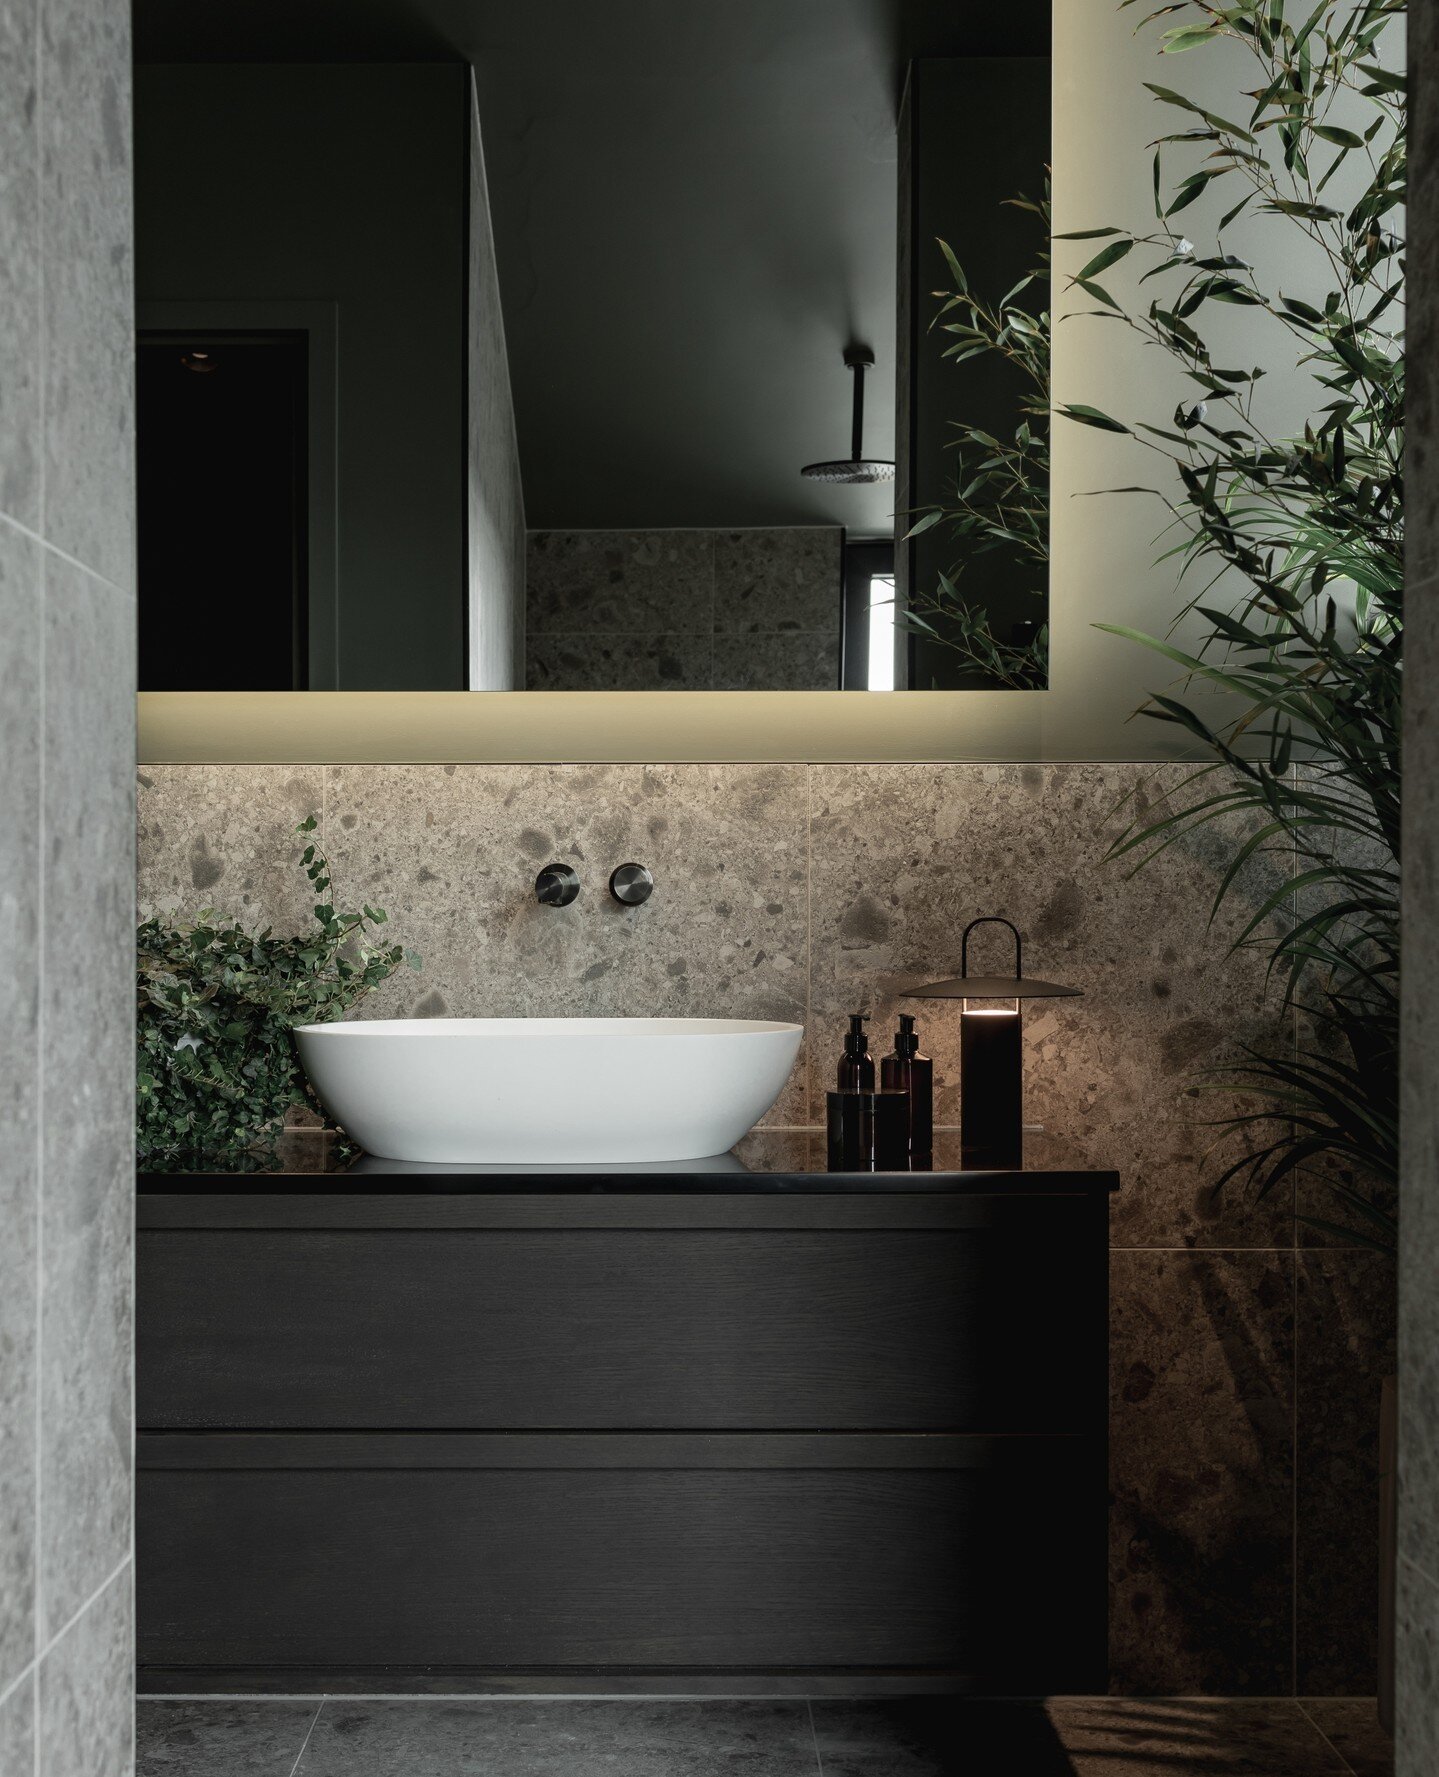 In matte white, the Picasso stone countertop basin provides a beautiful contrast to the dark hues and earthy tones seen in this luxury bath suite at Koto House.